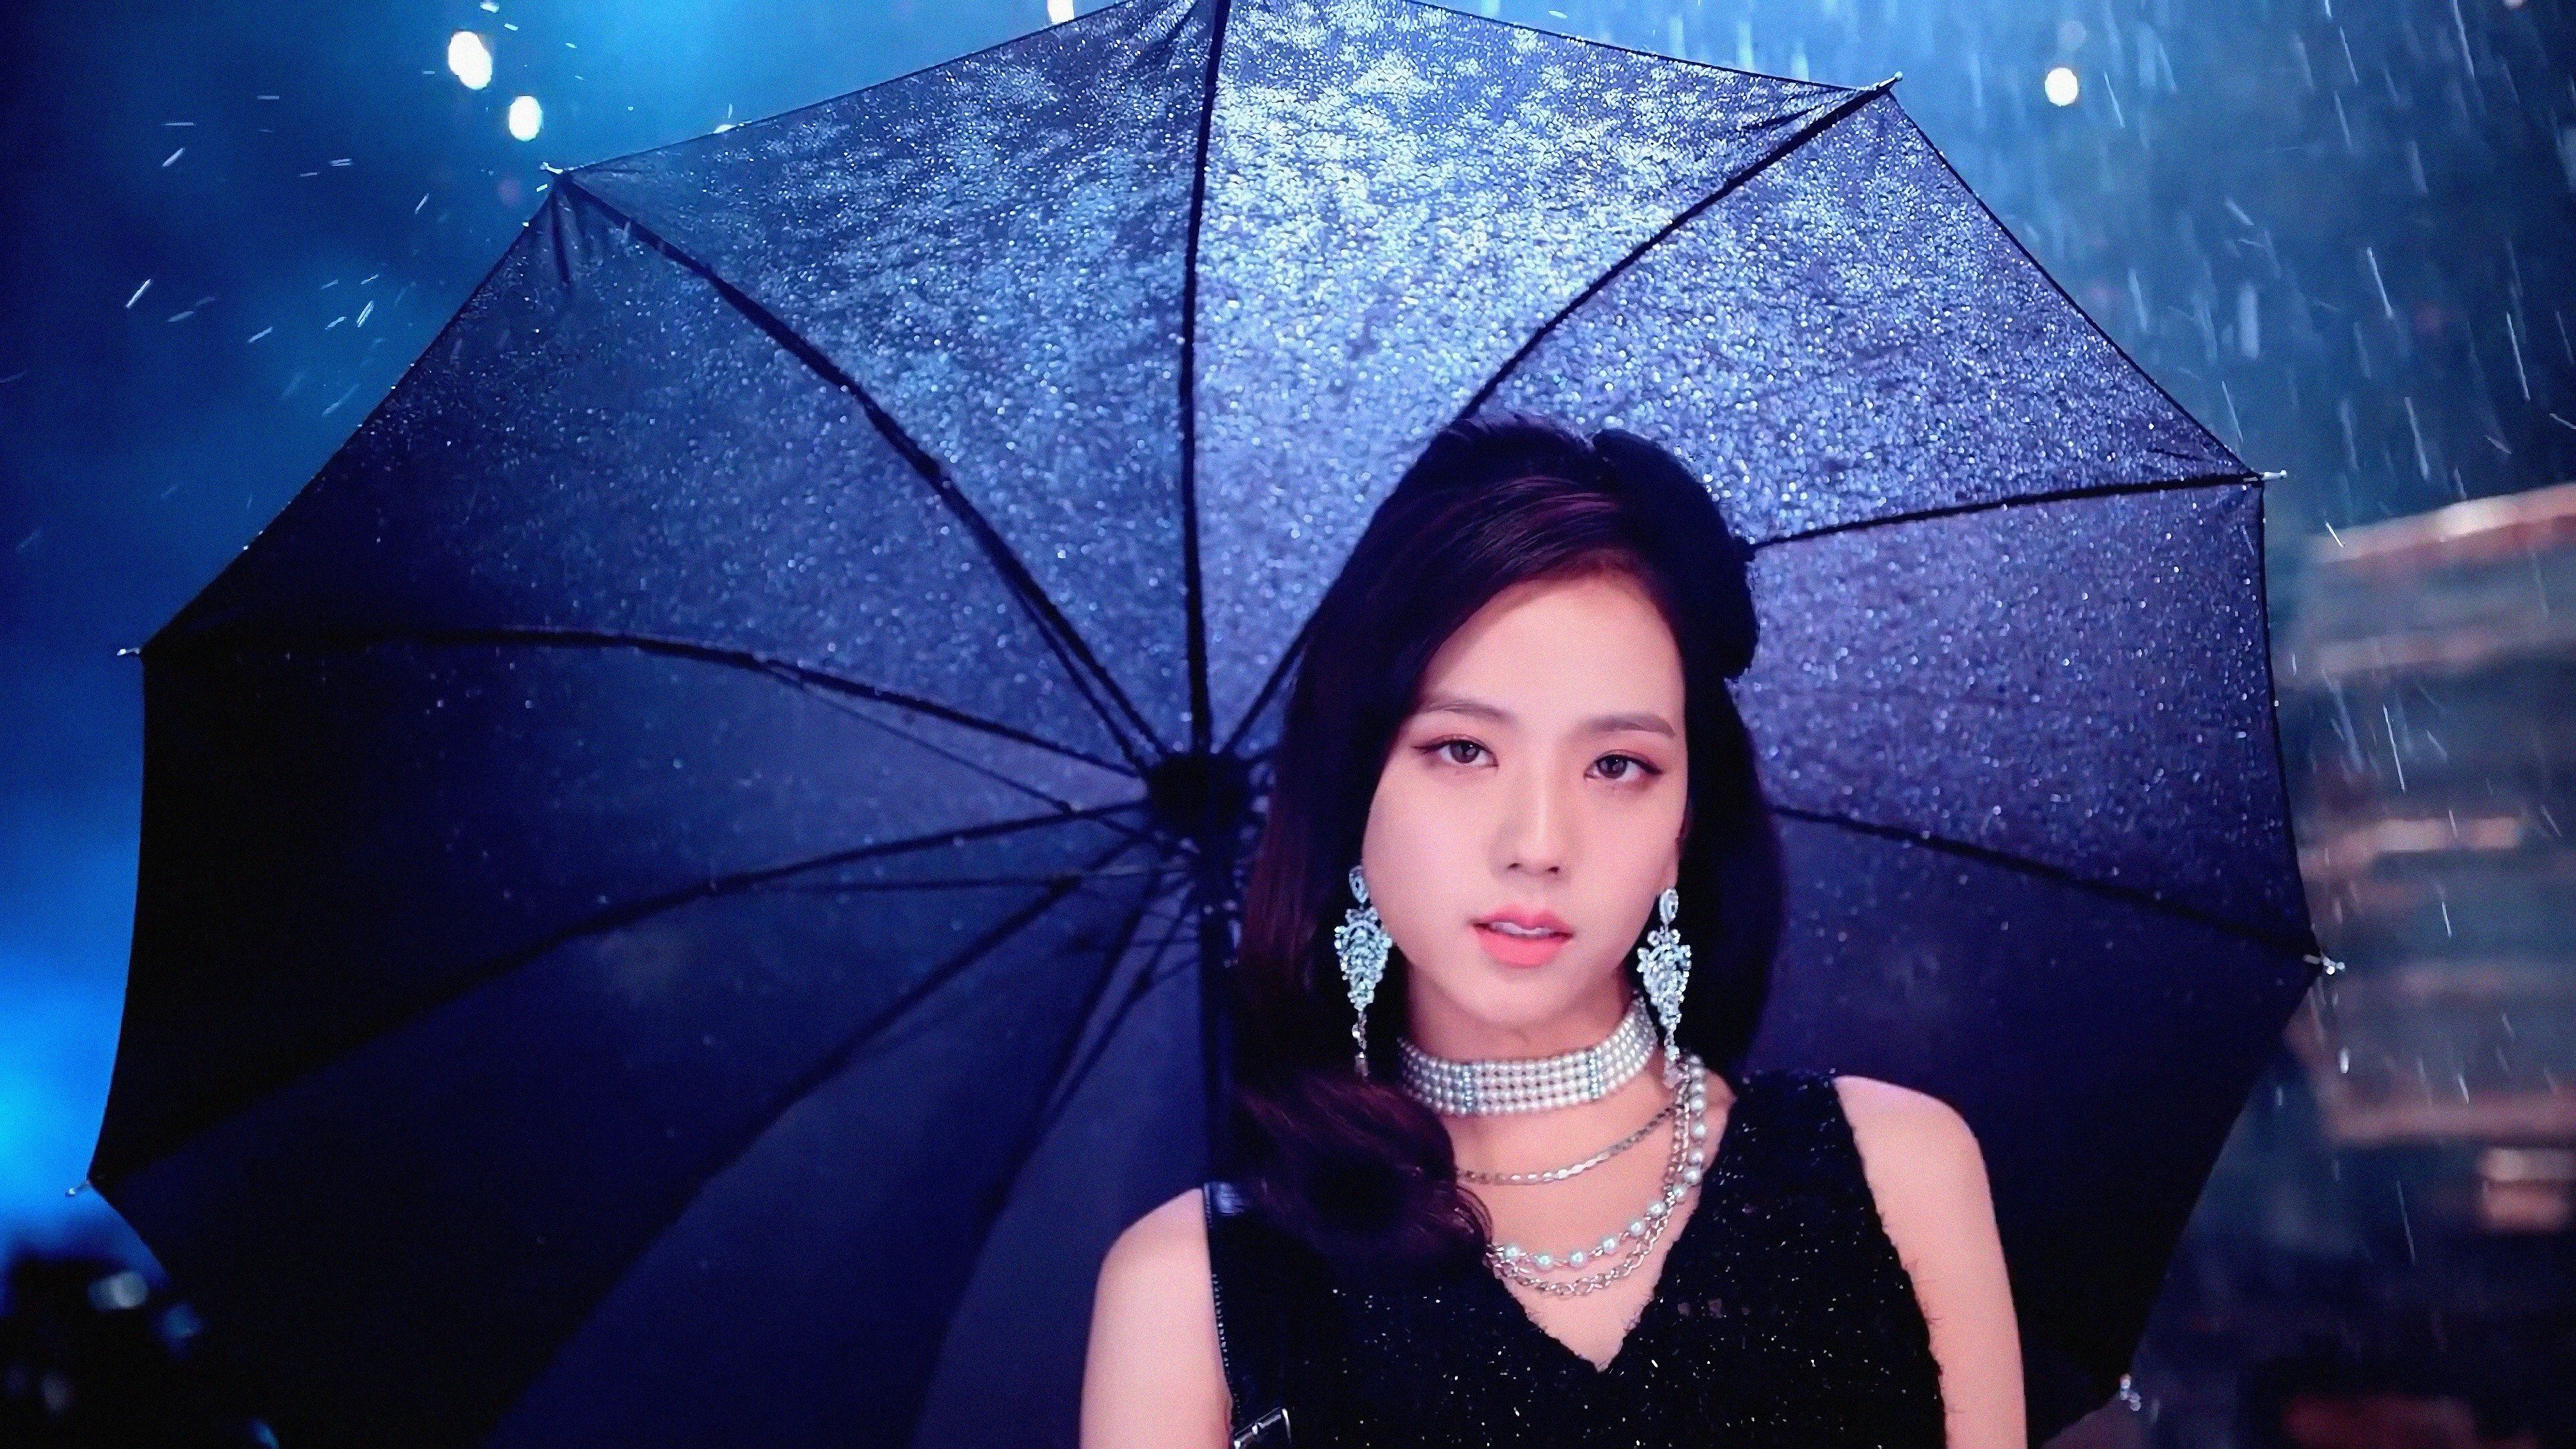 Free download Black Pink image Jisoo HD wallpaper and background photo 41440765 [3840x2160] for your Desktop, Mobile & Tablet. Explore BLACKPINK Jisoo Wallpaper. Jisoo BLACKPINK Wallpaper, BLACKPINK Jisoo Wallpaper